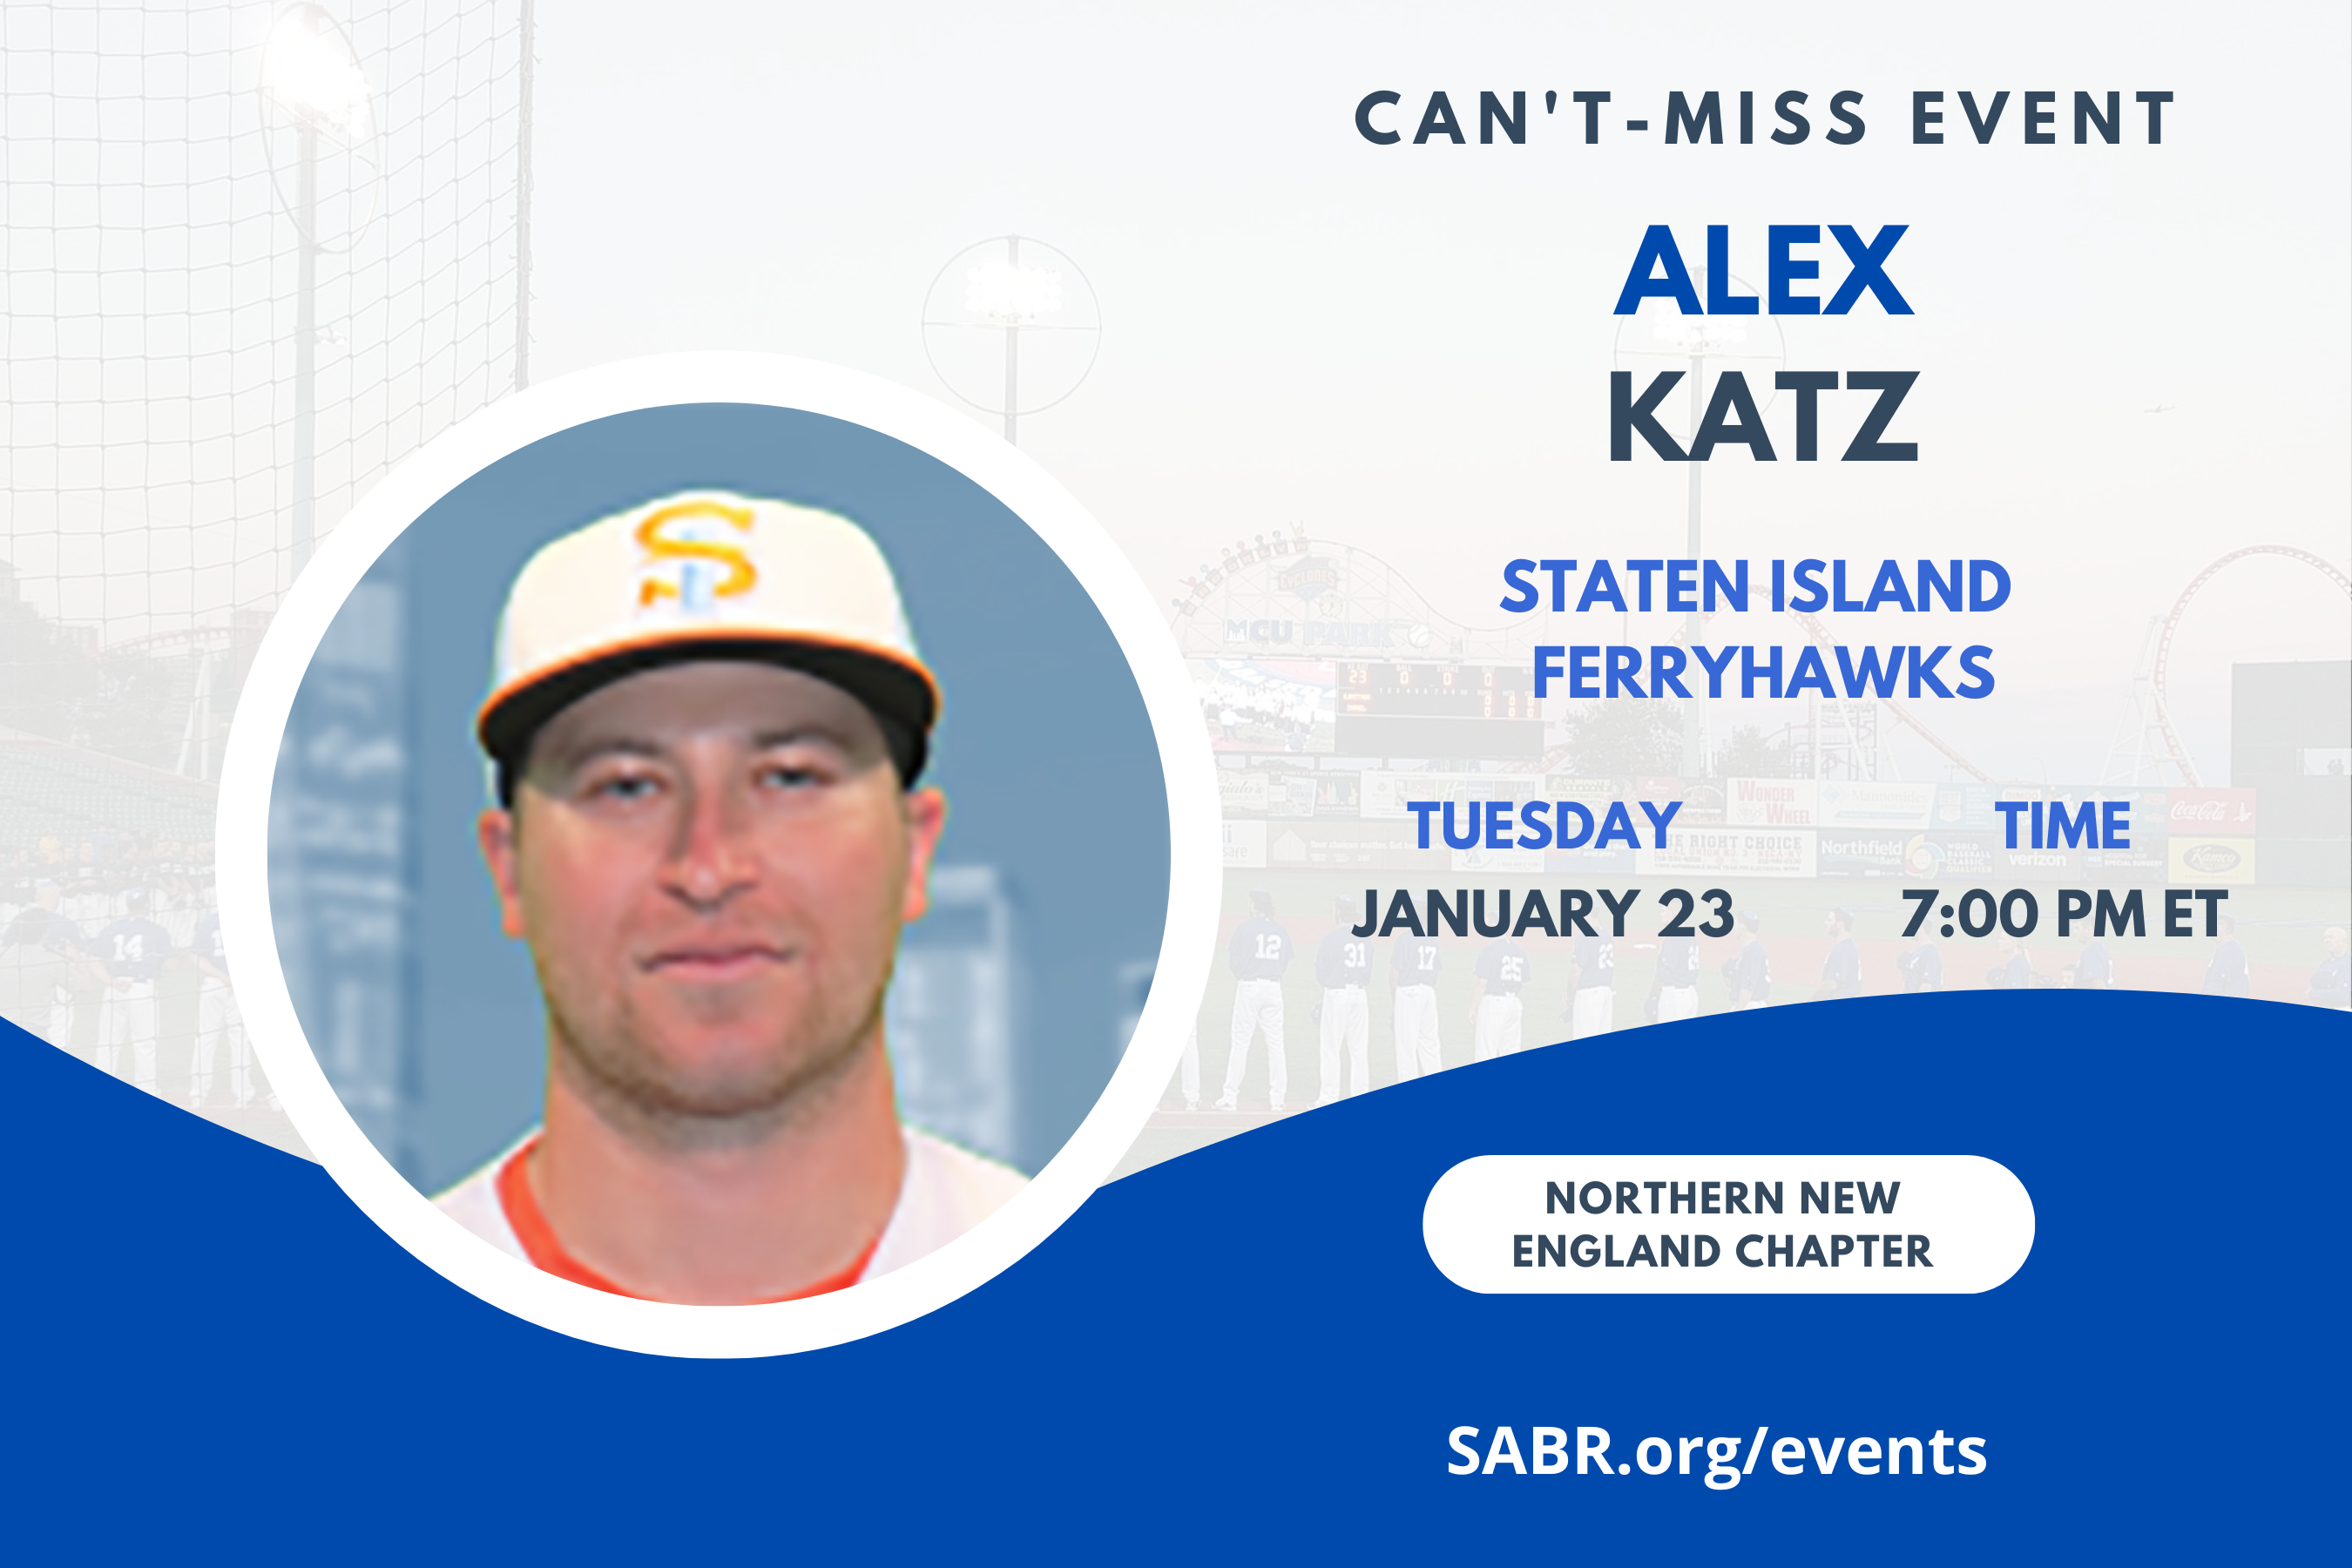 The Northern New England Chapter, always in conjunction with the Gardner-Waterman (VT) Chapter, welcomes Alex Katz in a virtual Zoom meeting at 7:00 p.m. Eastern on Tuesday, January 23, 2024. All baseball fans are welcome. Alex is an American-Israeli professional baseball left-handed pitcher for the Staten Island FerryHawks of the Atlantic League of Professional Baseball and he plays internationally for Team Israel.